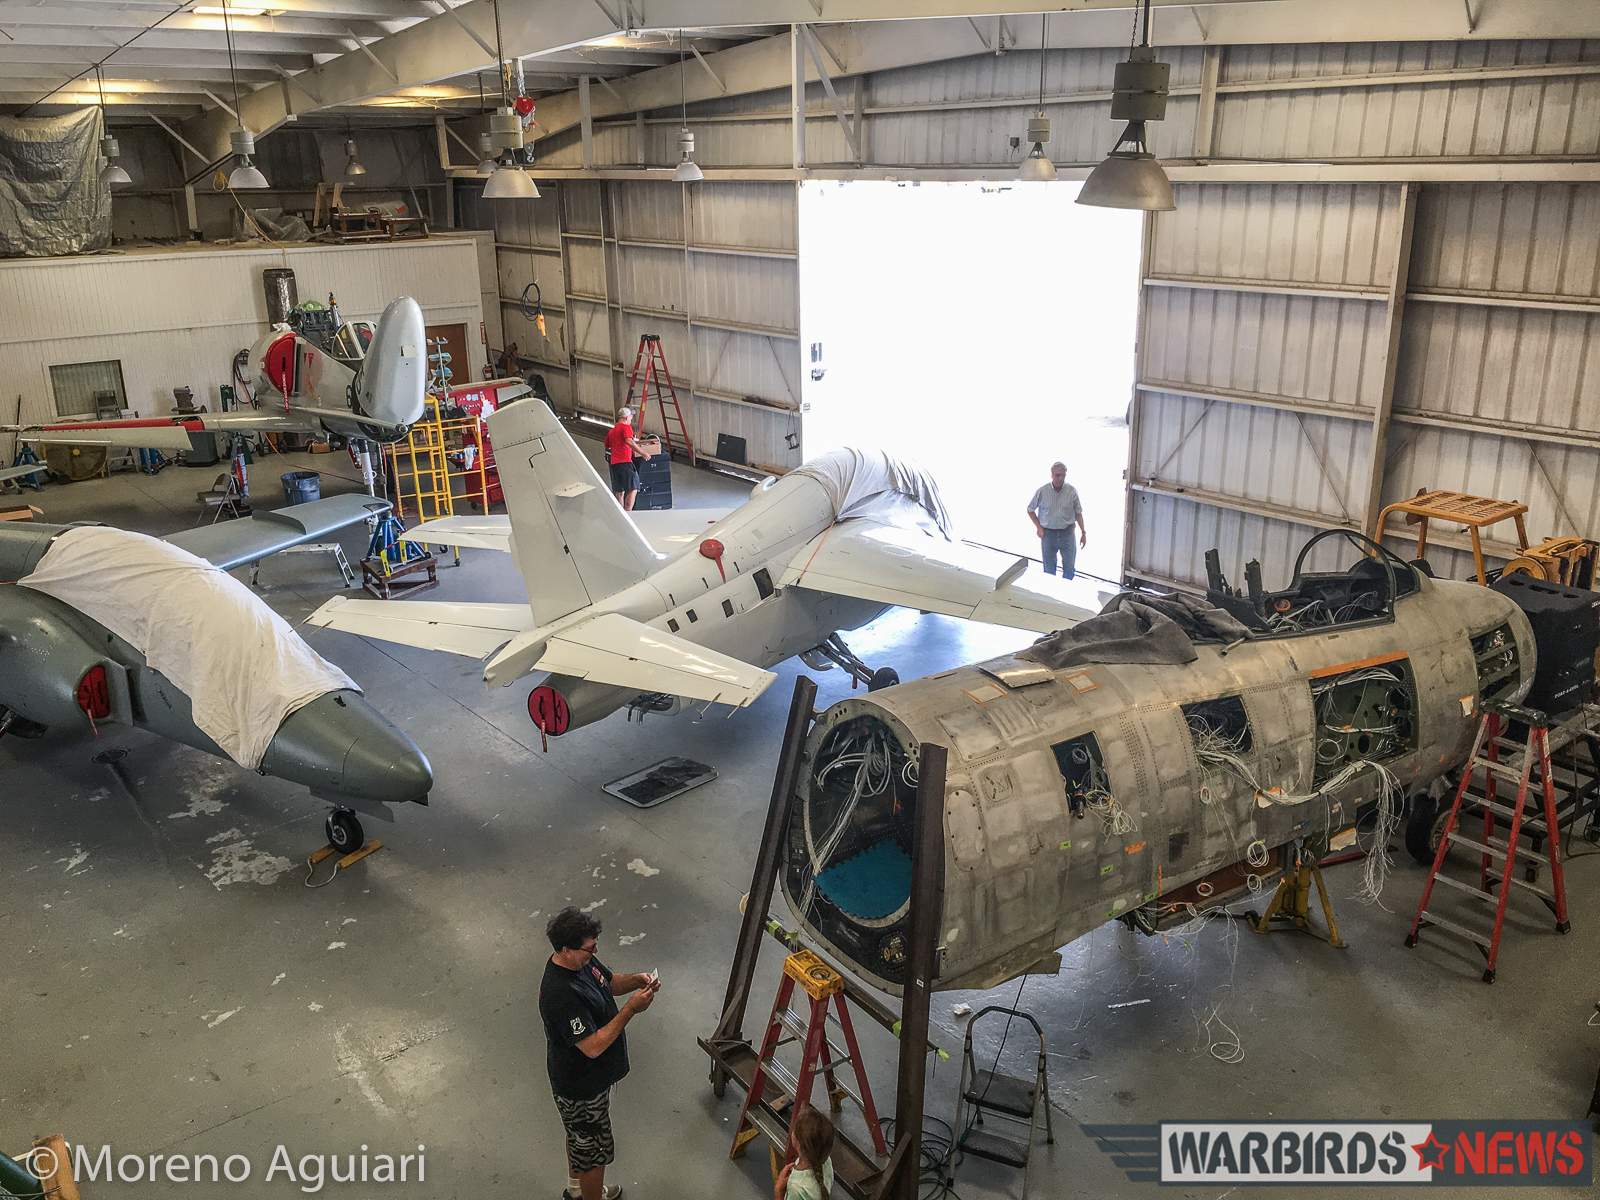 Classic Fighters of America's second F-86 Sabre is slowly coming together in the right foreground. The two already airworthy S.211s are in the middle, while the forward TA-4J is in the far back. (photo by Moreno Aguiari)